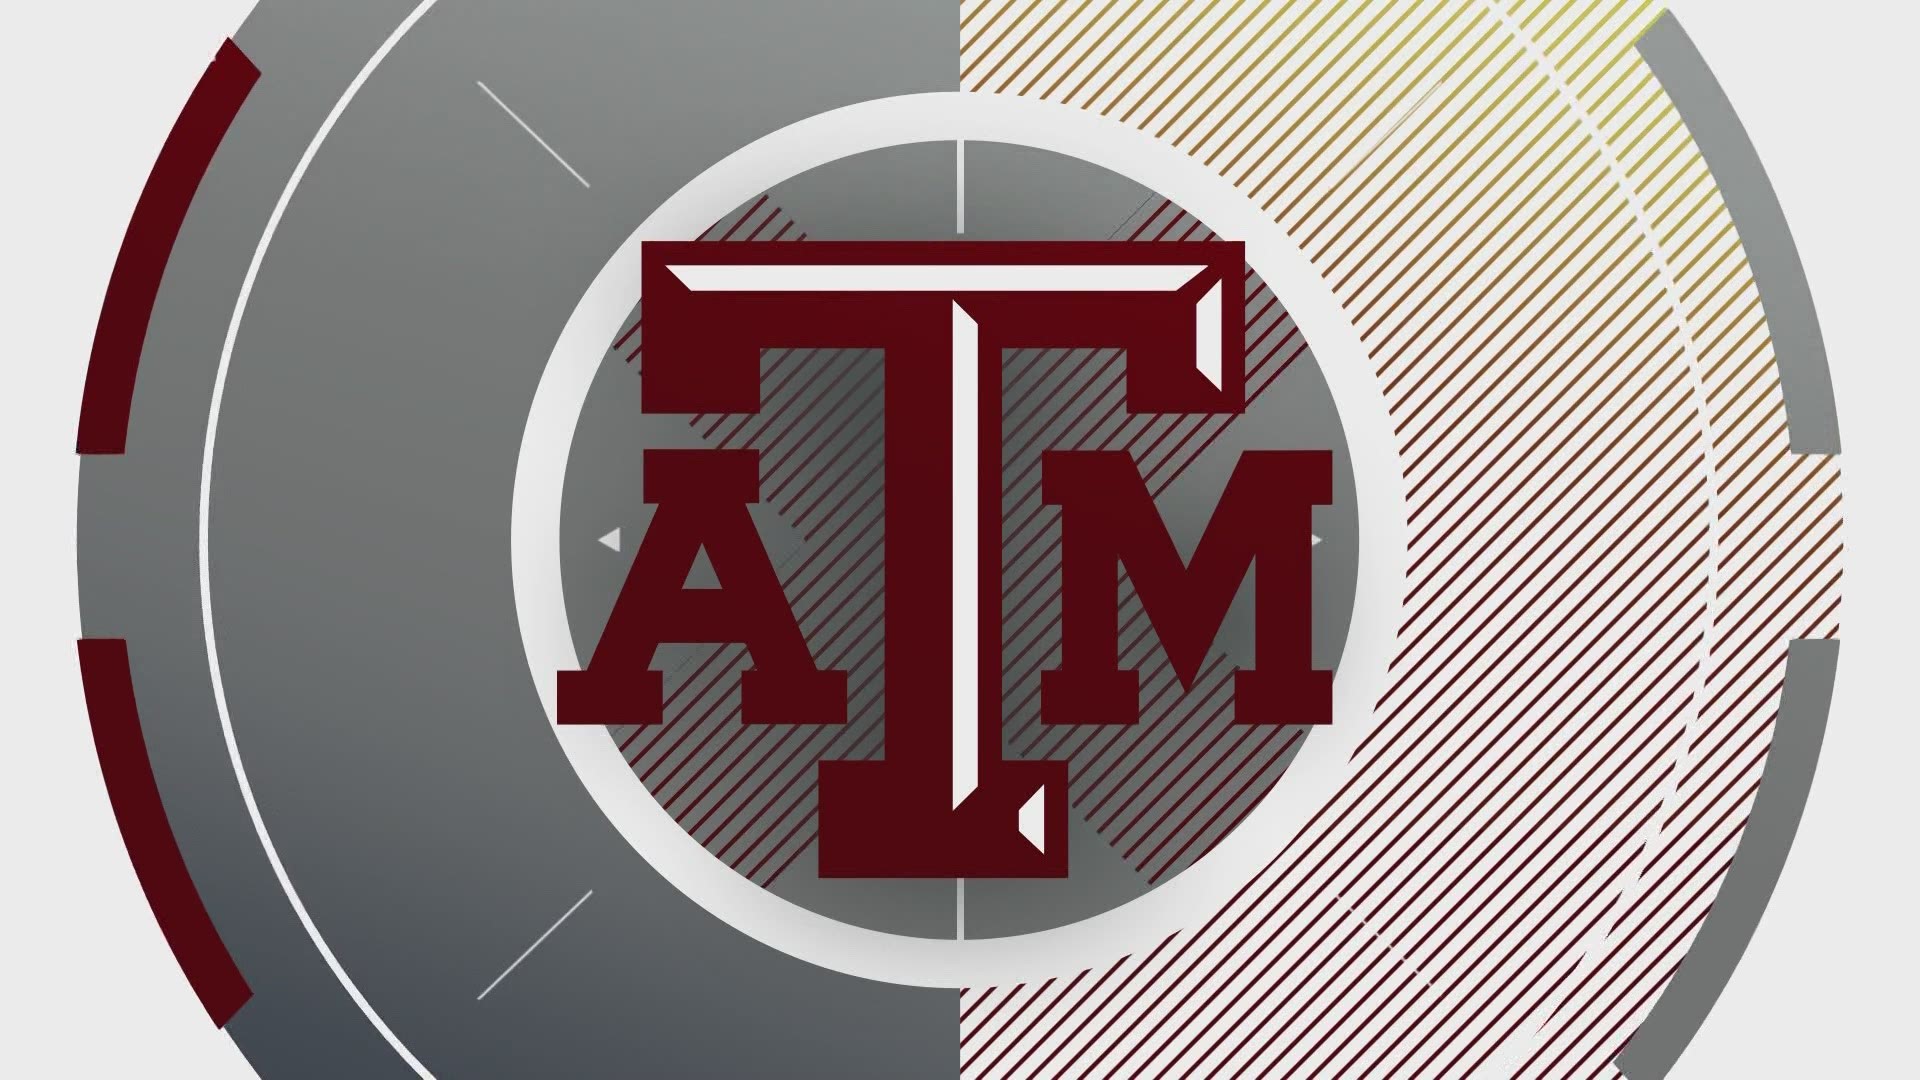 Currently on a five-game win streak, the Aggies beat LSU 20 to 7.